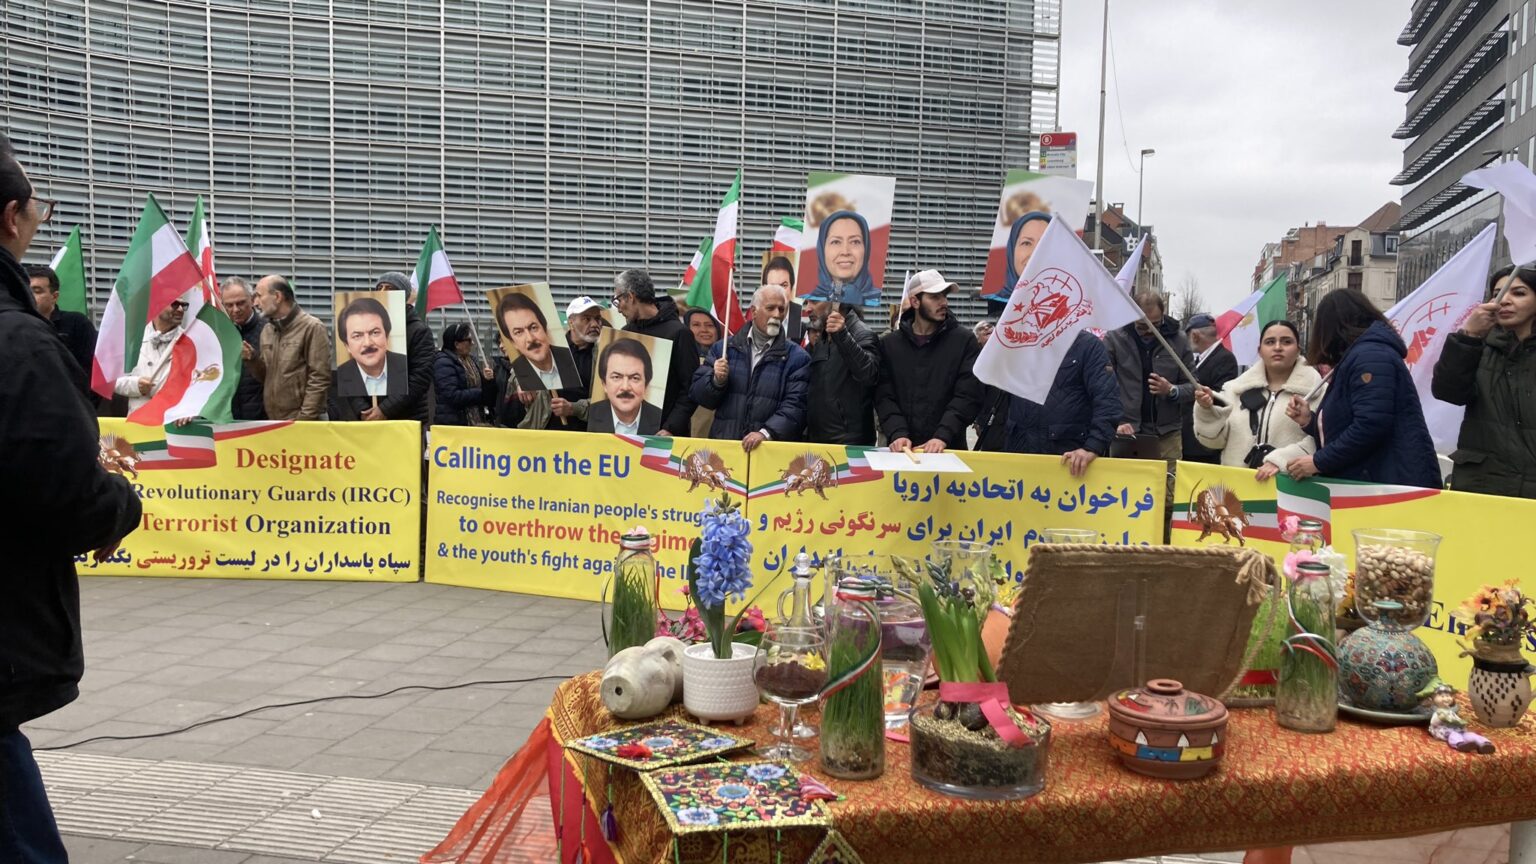 Iranians call on EU Summit to impose comprehensive sanctions against Iran’s clerical regime for warmongering, terrorism, and the pursuit of nuclear weapons.